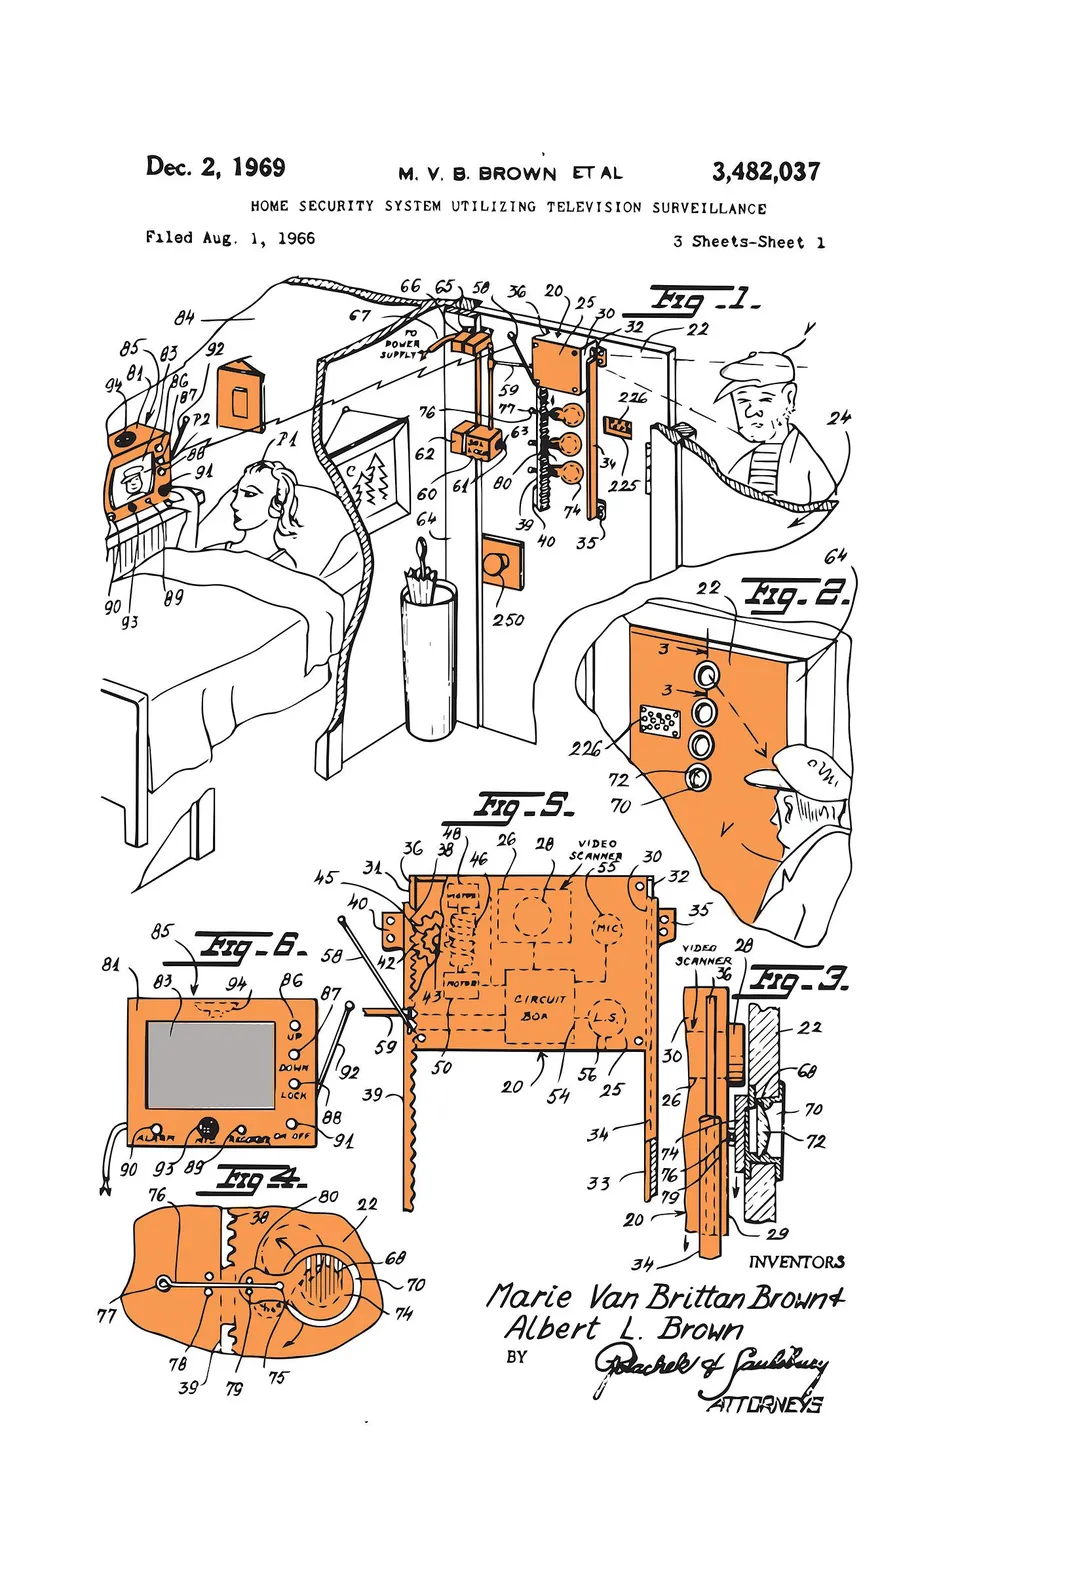 Patent application for bedside door security camera, sketched in black, white, and orange